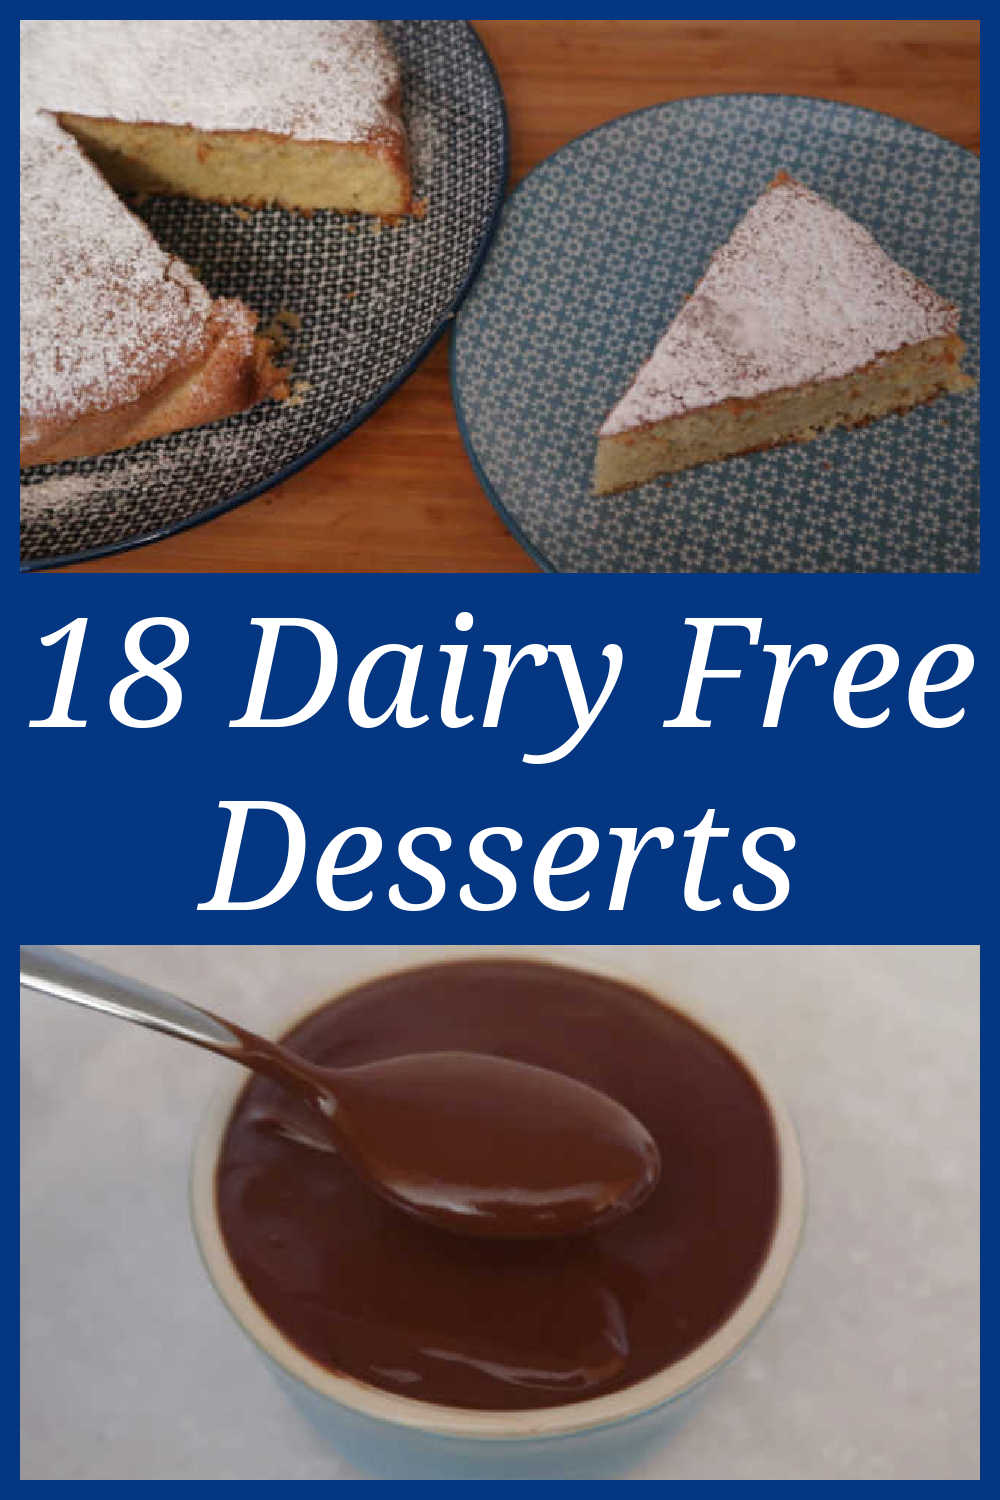 18 Dairy Free Dessert Recipes - the best easy and delicious desserts that you can make with almond milk, coconut milk or oat milk.